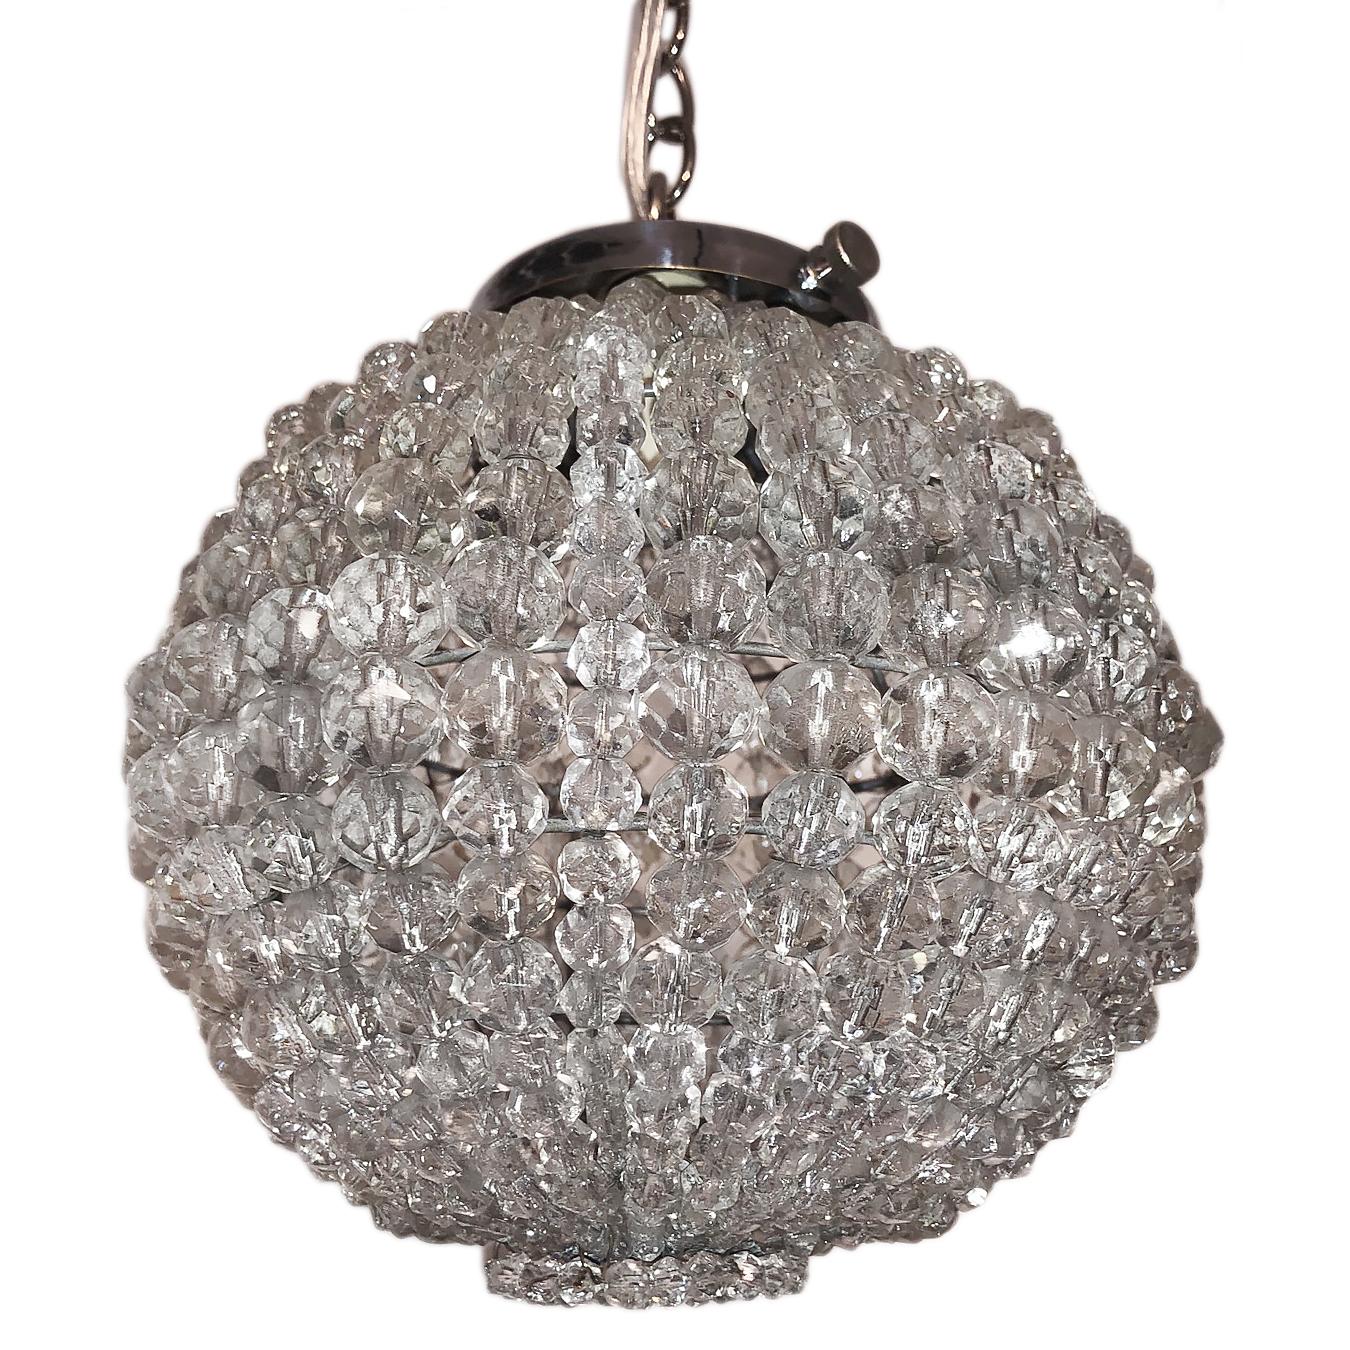 A circa 1940's French crystal beaded lantern with nickel-plated hardware.

Measurements:
Minimum drop 10